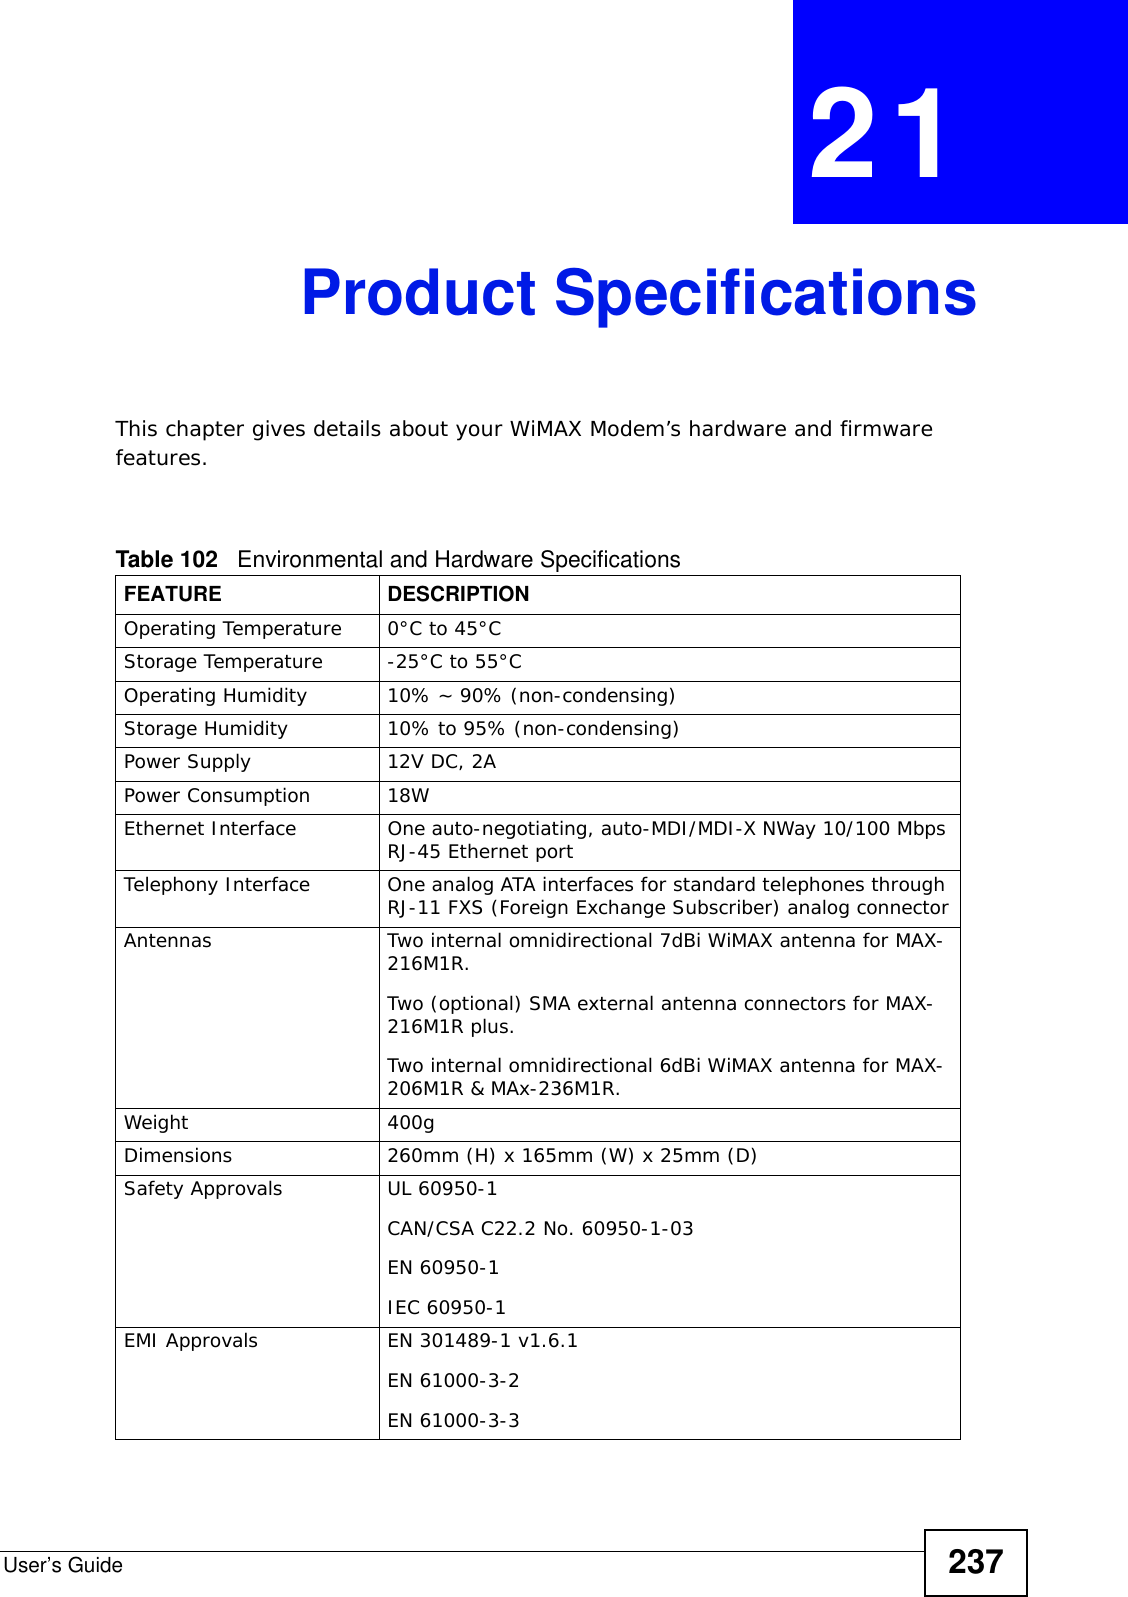 User’s Guide 237CHAPTER  21 Product SpecificationsThis chapter gives details about your WiMAX Modem’s hardware and firmware features.                                      Table 102   Environmental and Hardware SpecificationsFEATURE DESCRIPTIONOperating Temperature 0°C to 45°CStorage Temperature -25°C to 55°COperating Humidity 10% ~ 90% (non-condensing)Storage Humidity  10% to 95% (non-condensing)Power Supply 12V DC, 2APower Consumption 18WEthernet Interface One auto-negotiating, auto-MDI/MDI-X NWay 10/100 Mbps RJ-45 Ethernet portTelephony Interface One analog ATA interfaces for standard telephones through RJ-11 FXS (Foreign Exchange Subscriber) analog connectorAntennas Two internal omnidirectional 7dBi WiMAX antenna for MAX-216M1R.Two (optional) SMA external antenna connectors for MAX-216M1R plus.Two internal omnidirectional 6dBi WiMAX antenna for MAX-206M1R &amp; MAx-236M1R.Weight 400gDimensions 260mm (H) x 165mm (W) x 25mm (D)Safety Approvals UL 60950-1CAN/CSA C22.2 No. 60950-1-03EN 60950-1IEC 60950-1EMI Approvals EN 301489-1 v1.6.1EN 61000-3-2EN 61000-3-3